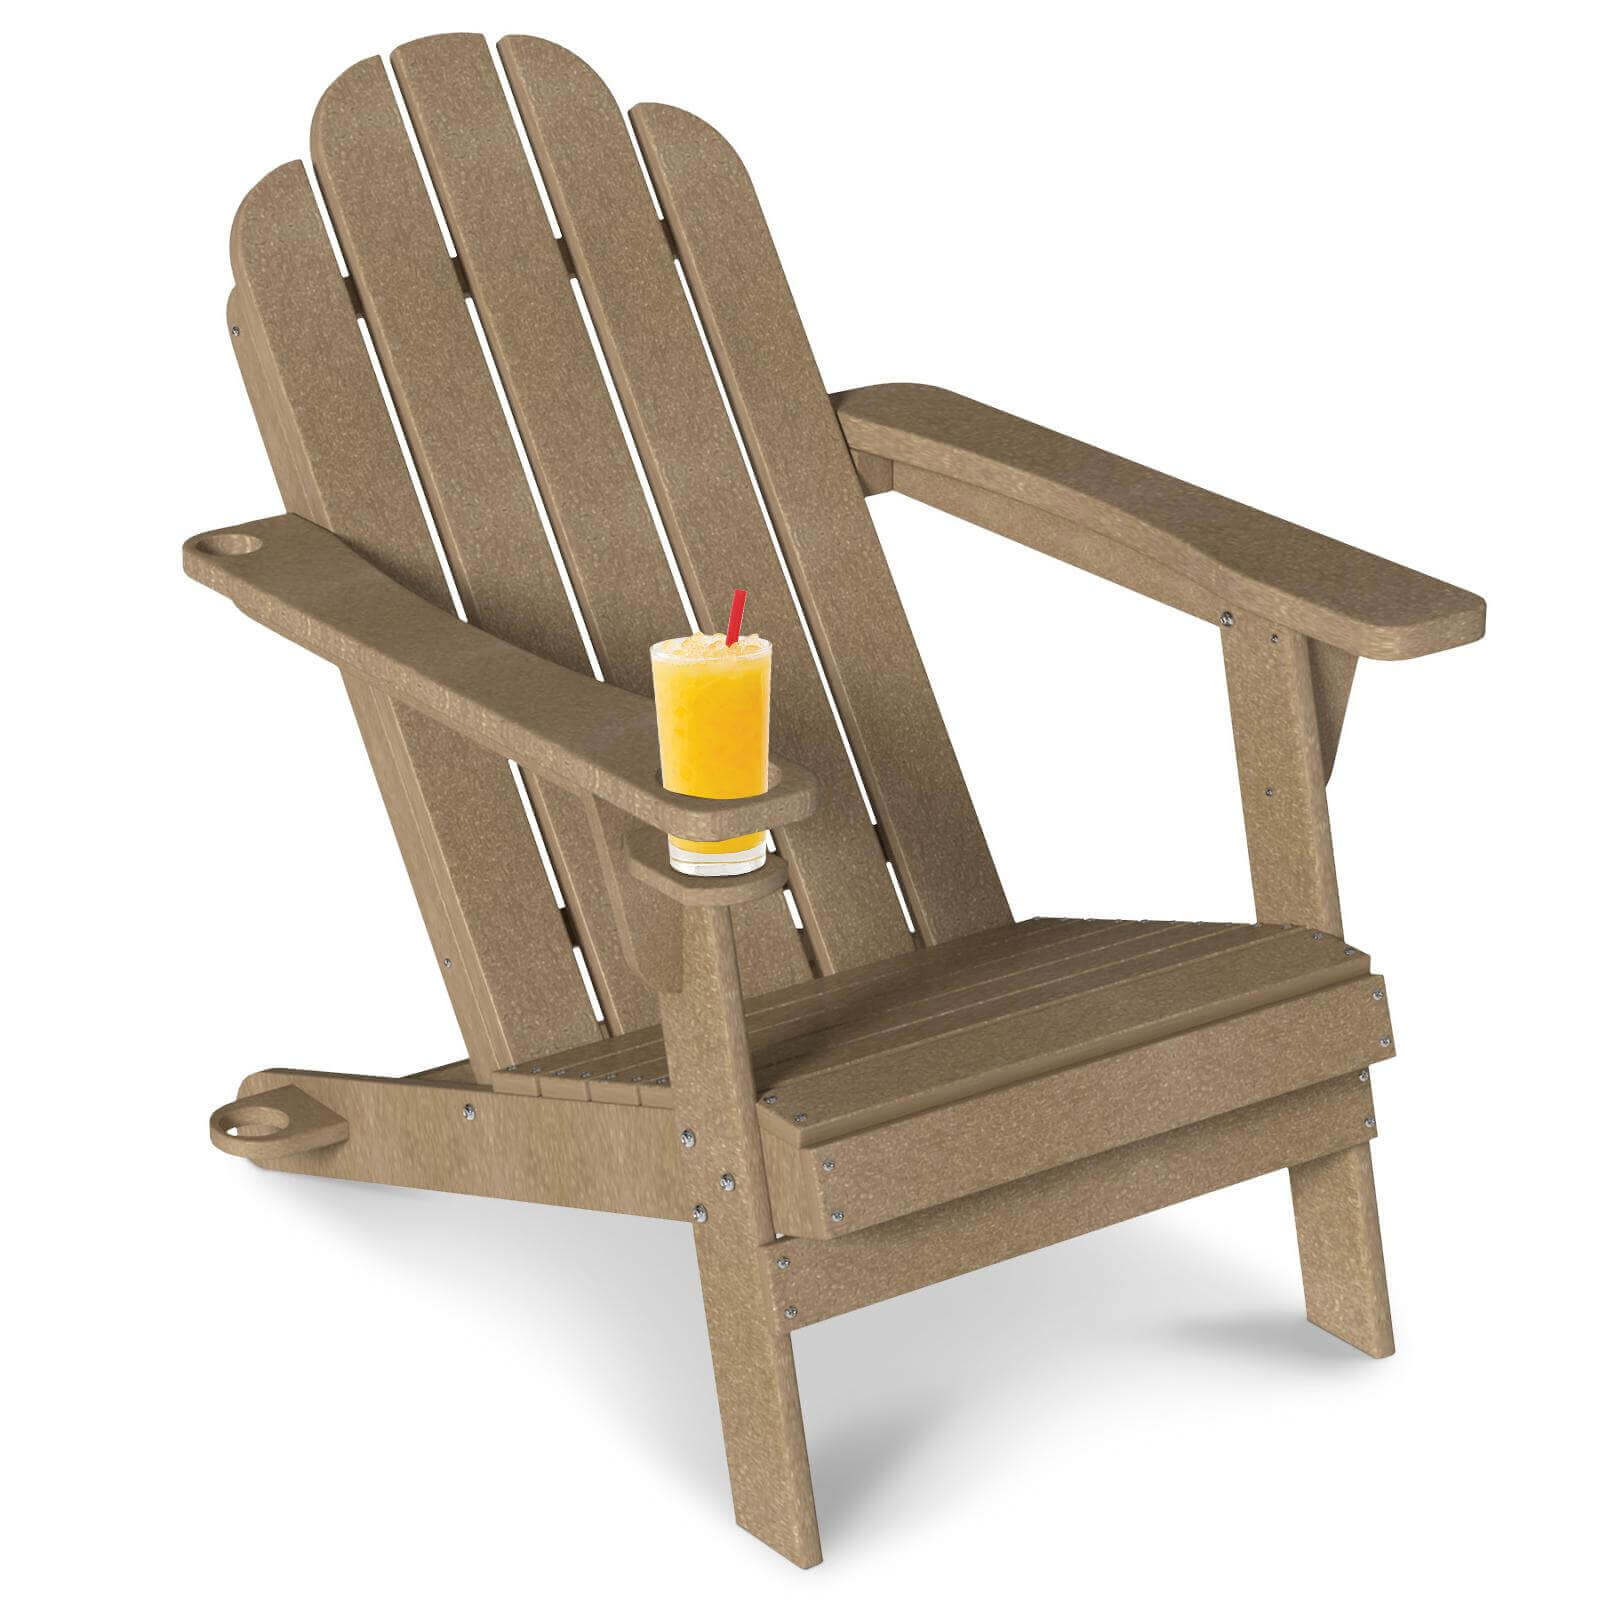 HDPE Adirondack Chair with 3.15 in. Cup Holder and 1.5in. umbrella holder